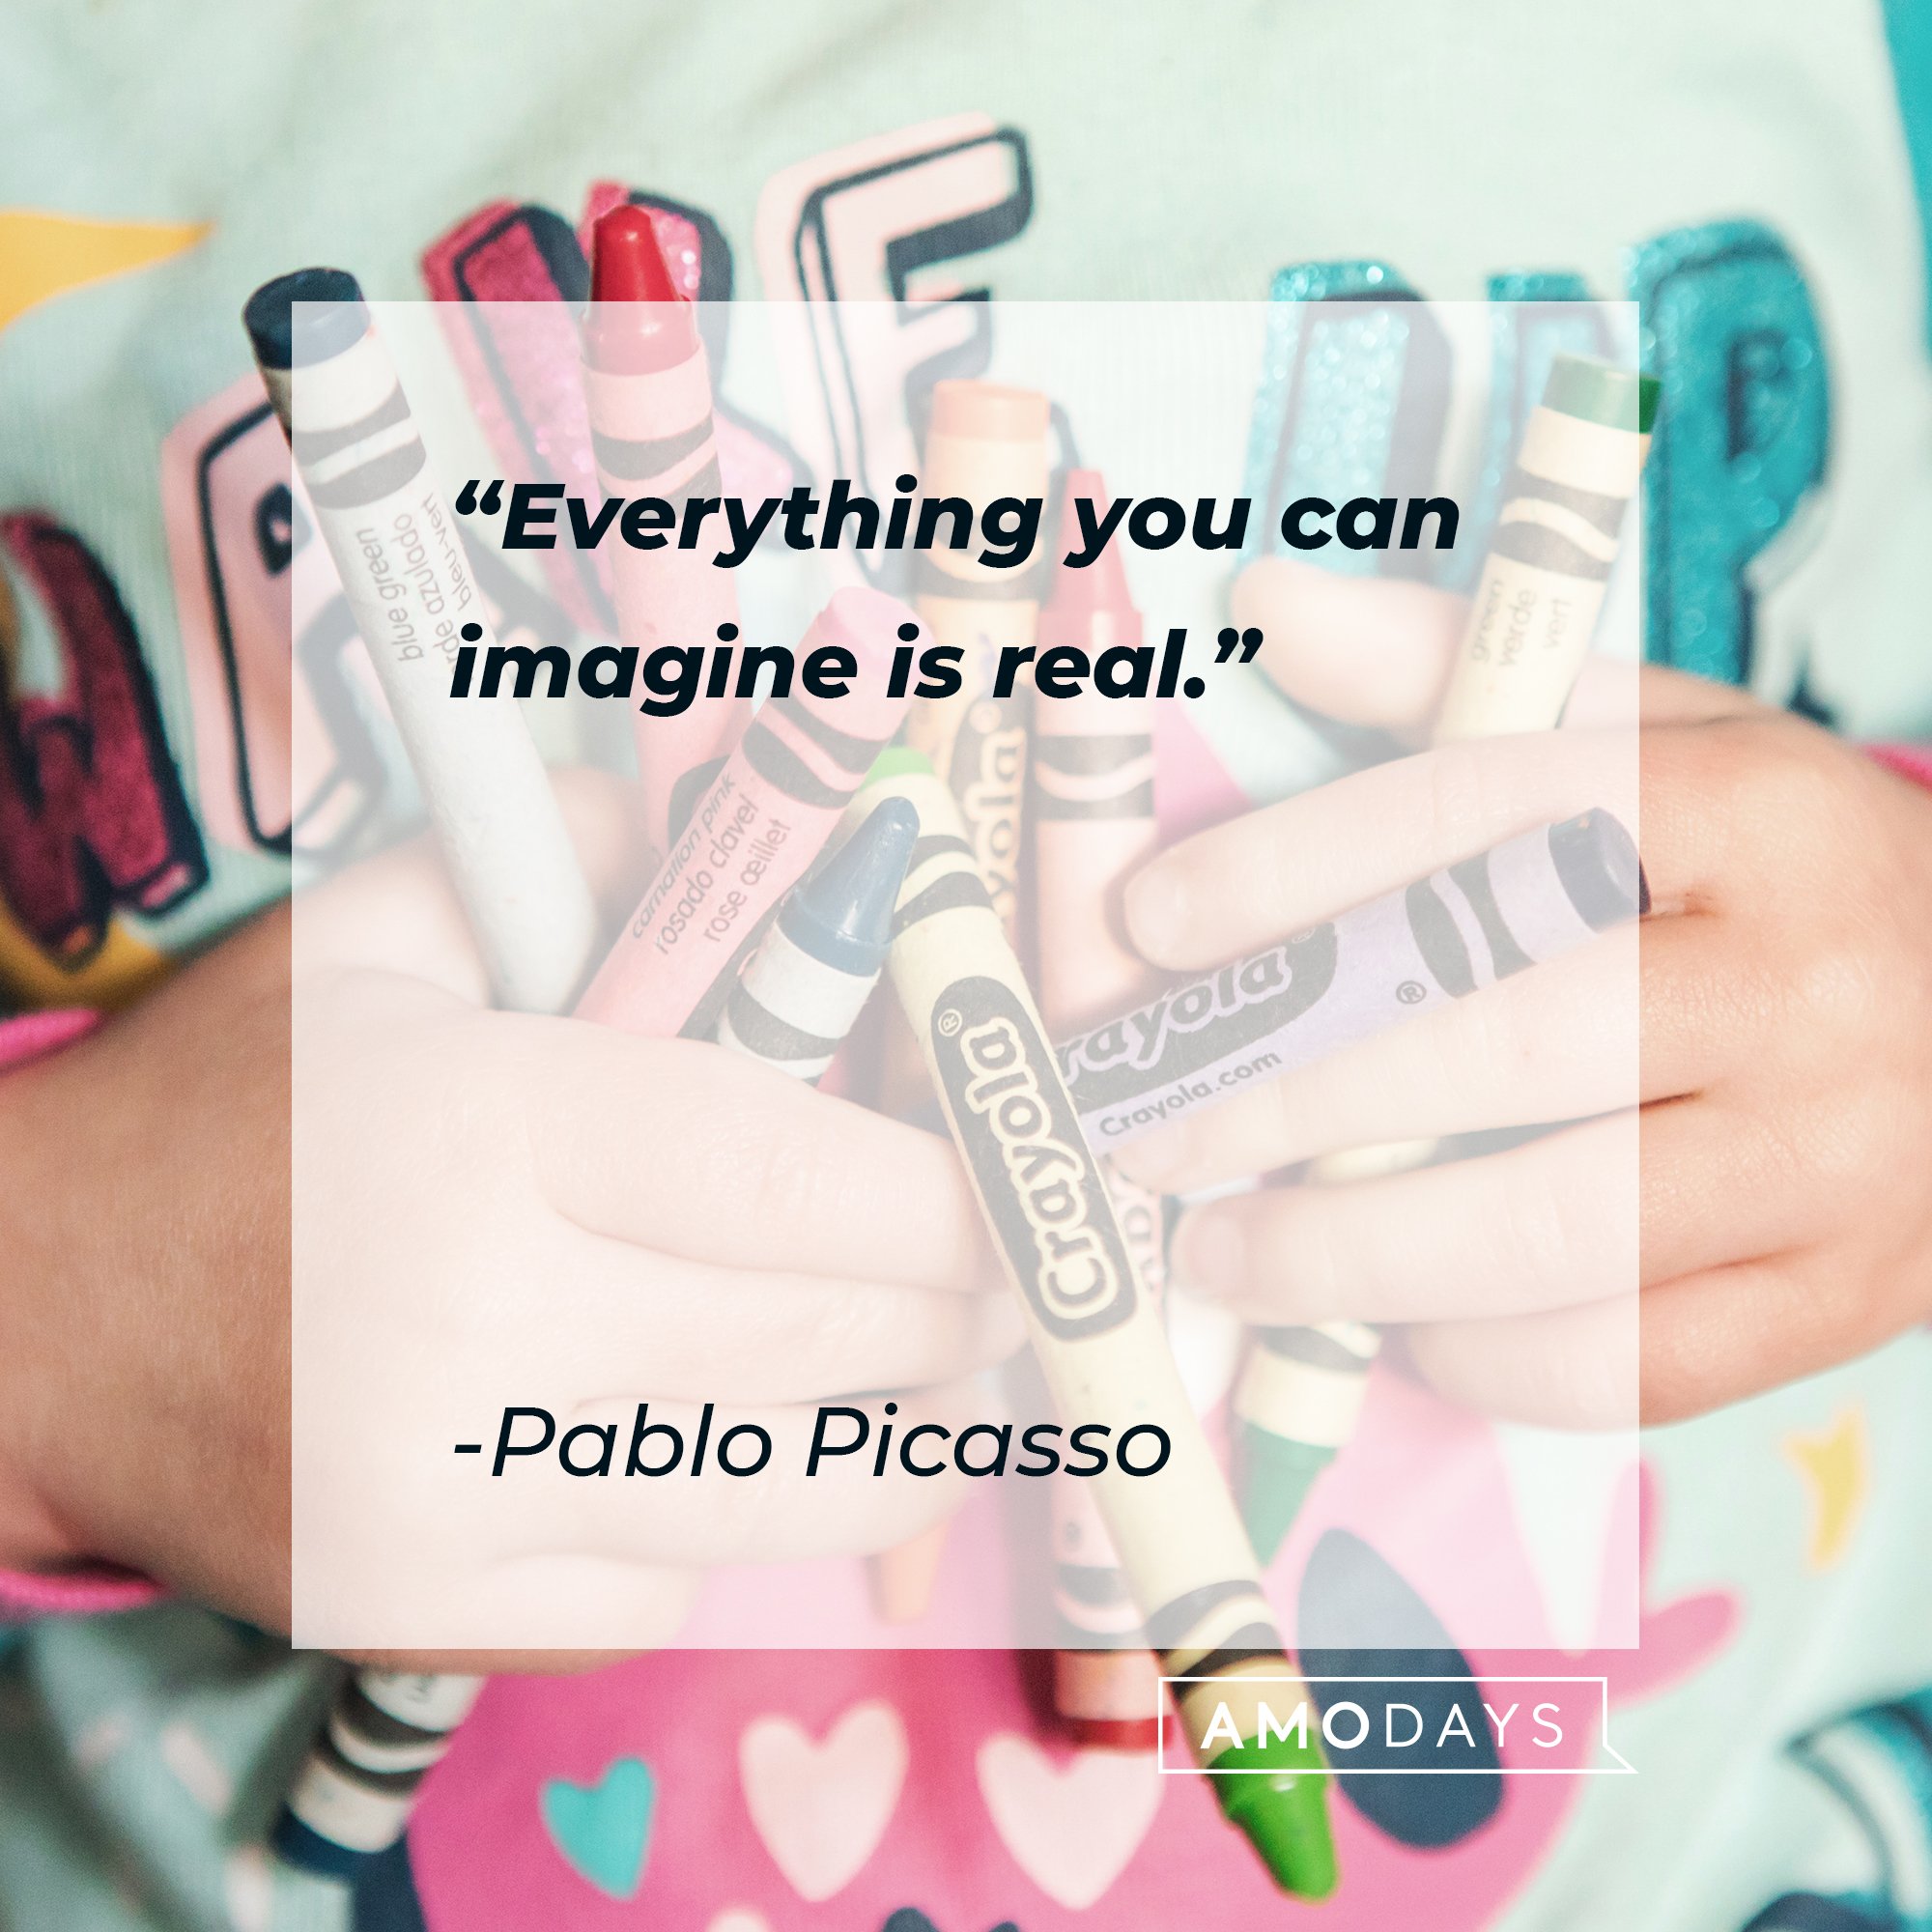 Pablo Picasso's quote: "Everything you can imagine is real."  | Image: AmoDays 